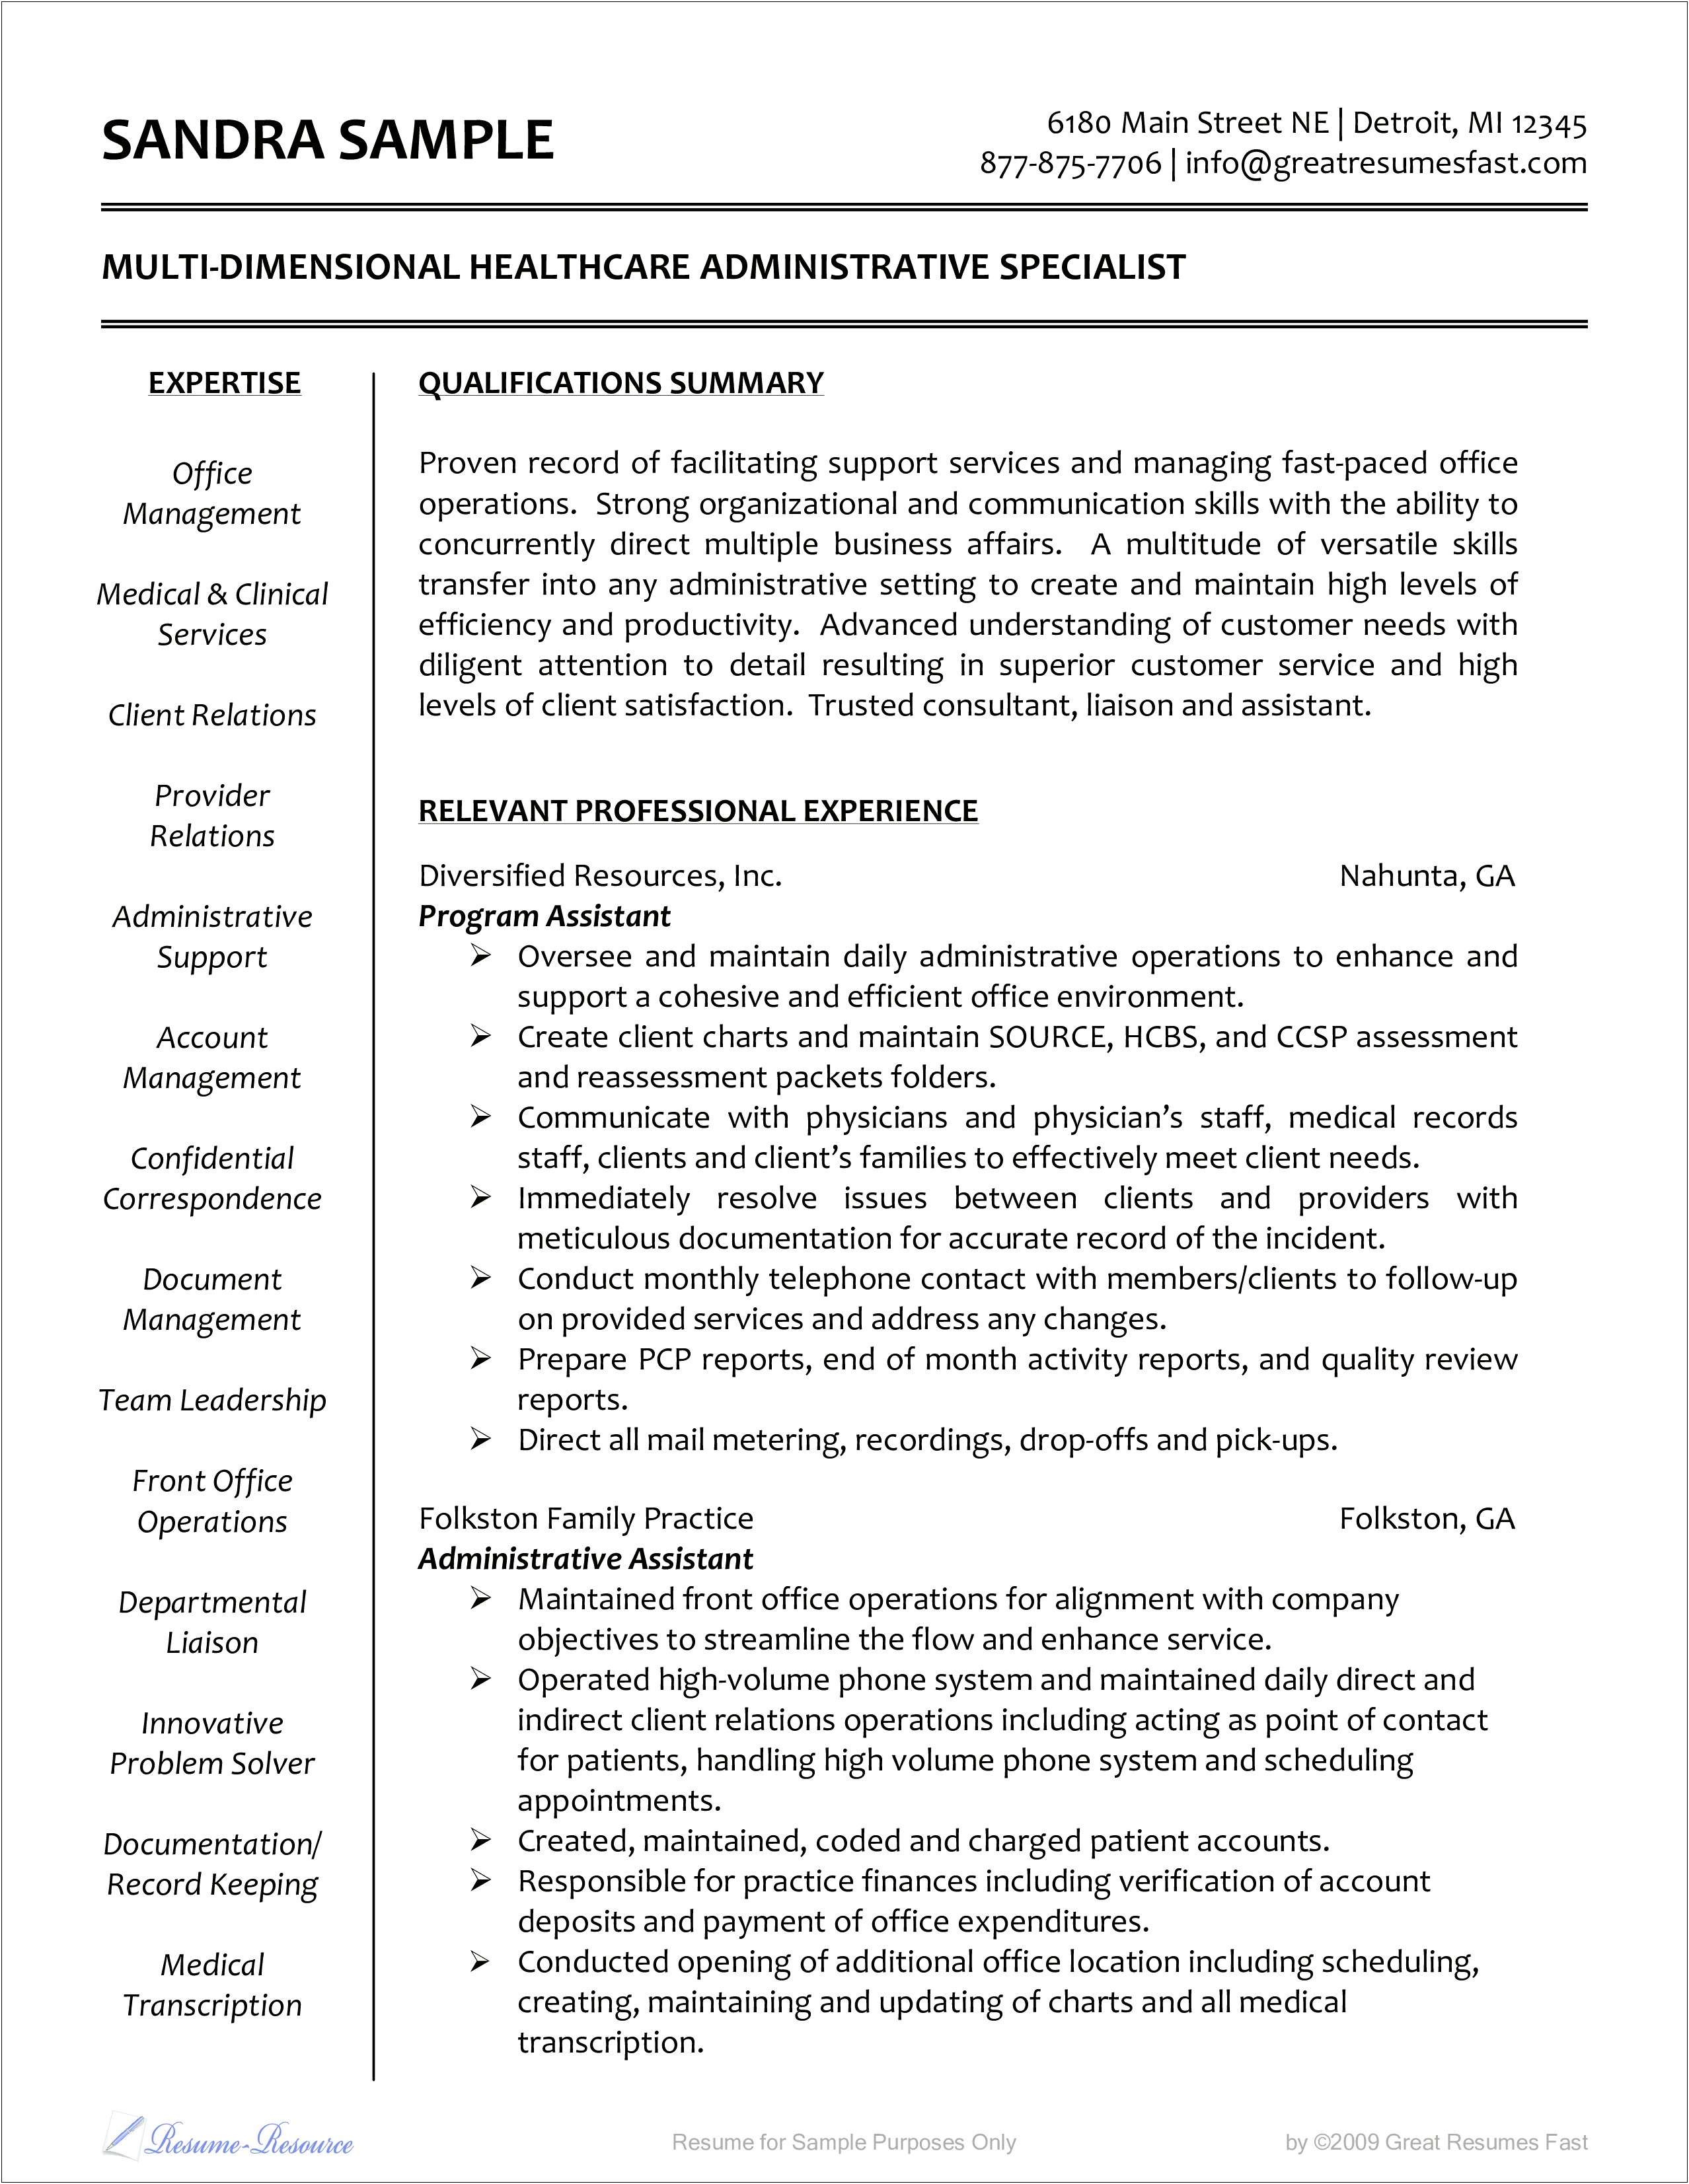 Best Resumes For Healthcare Administration